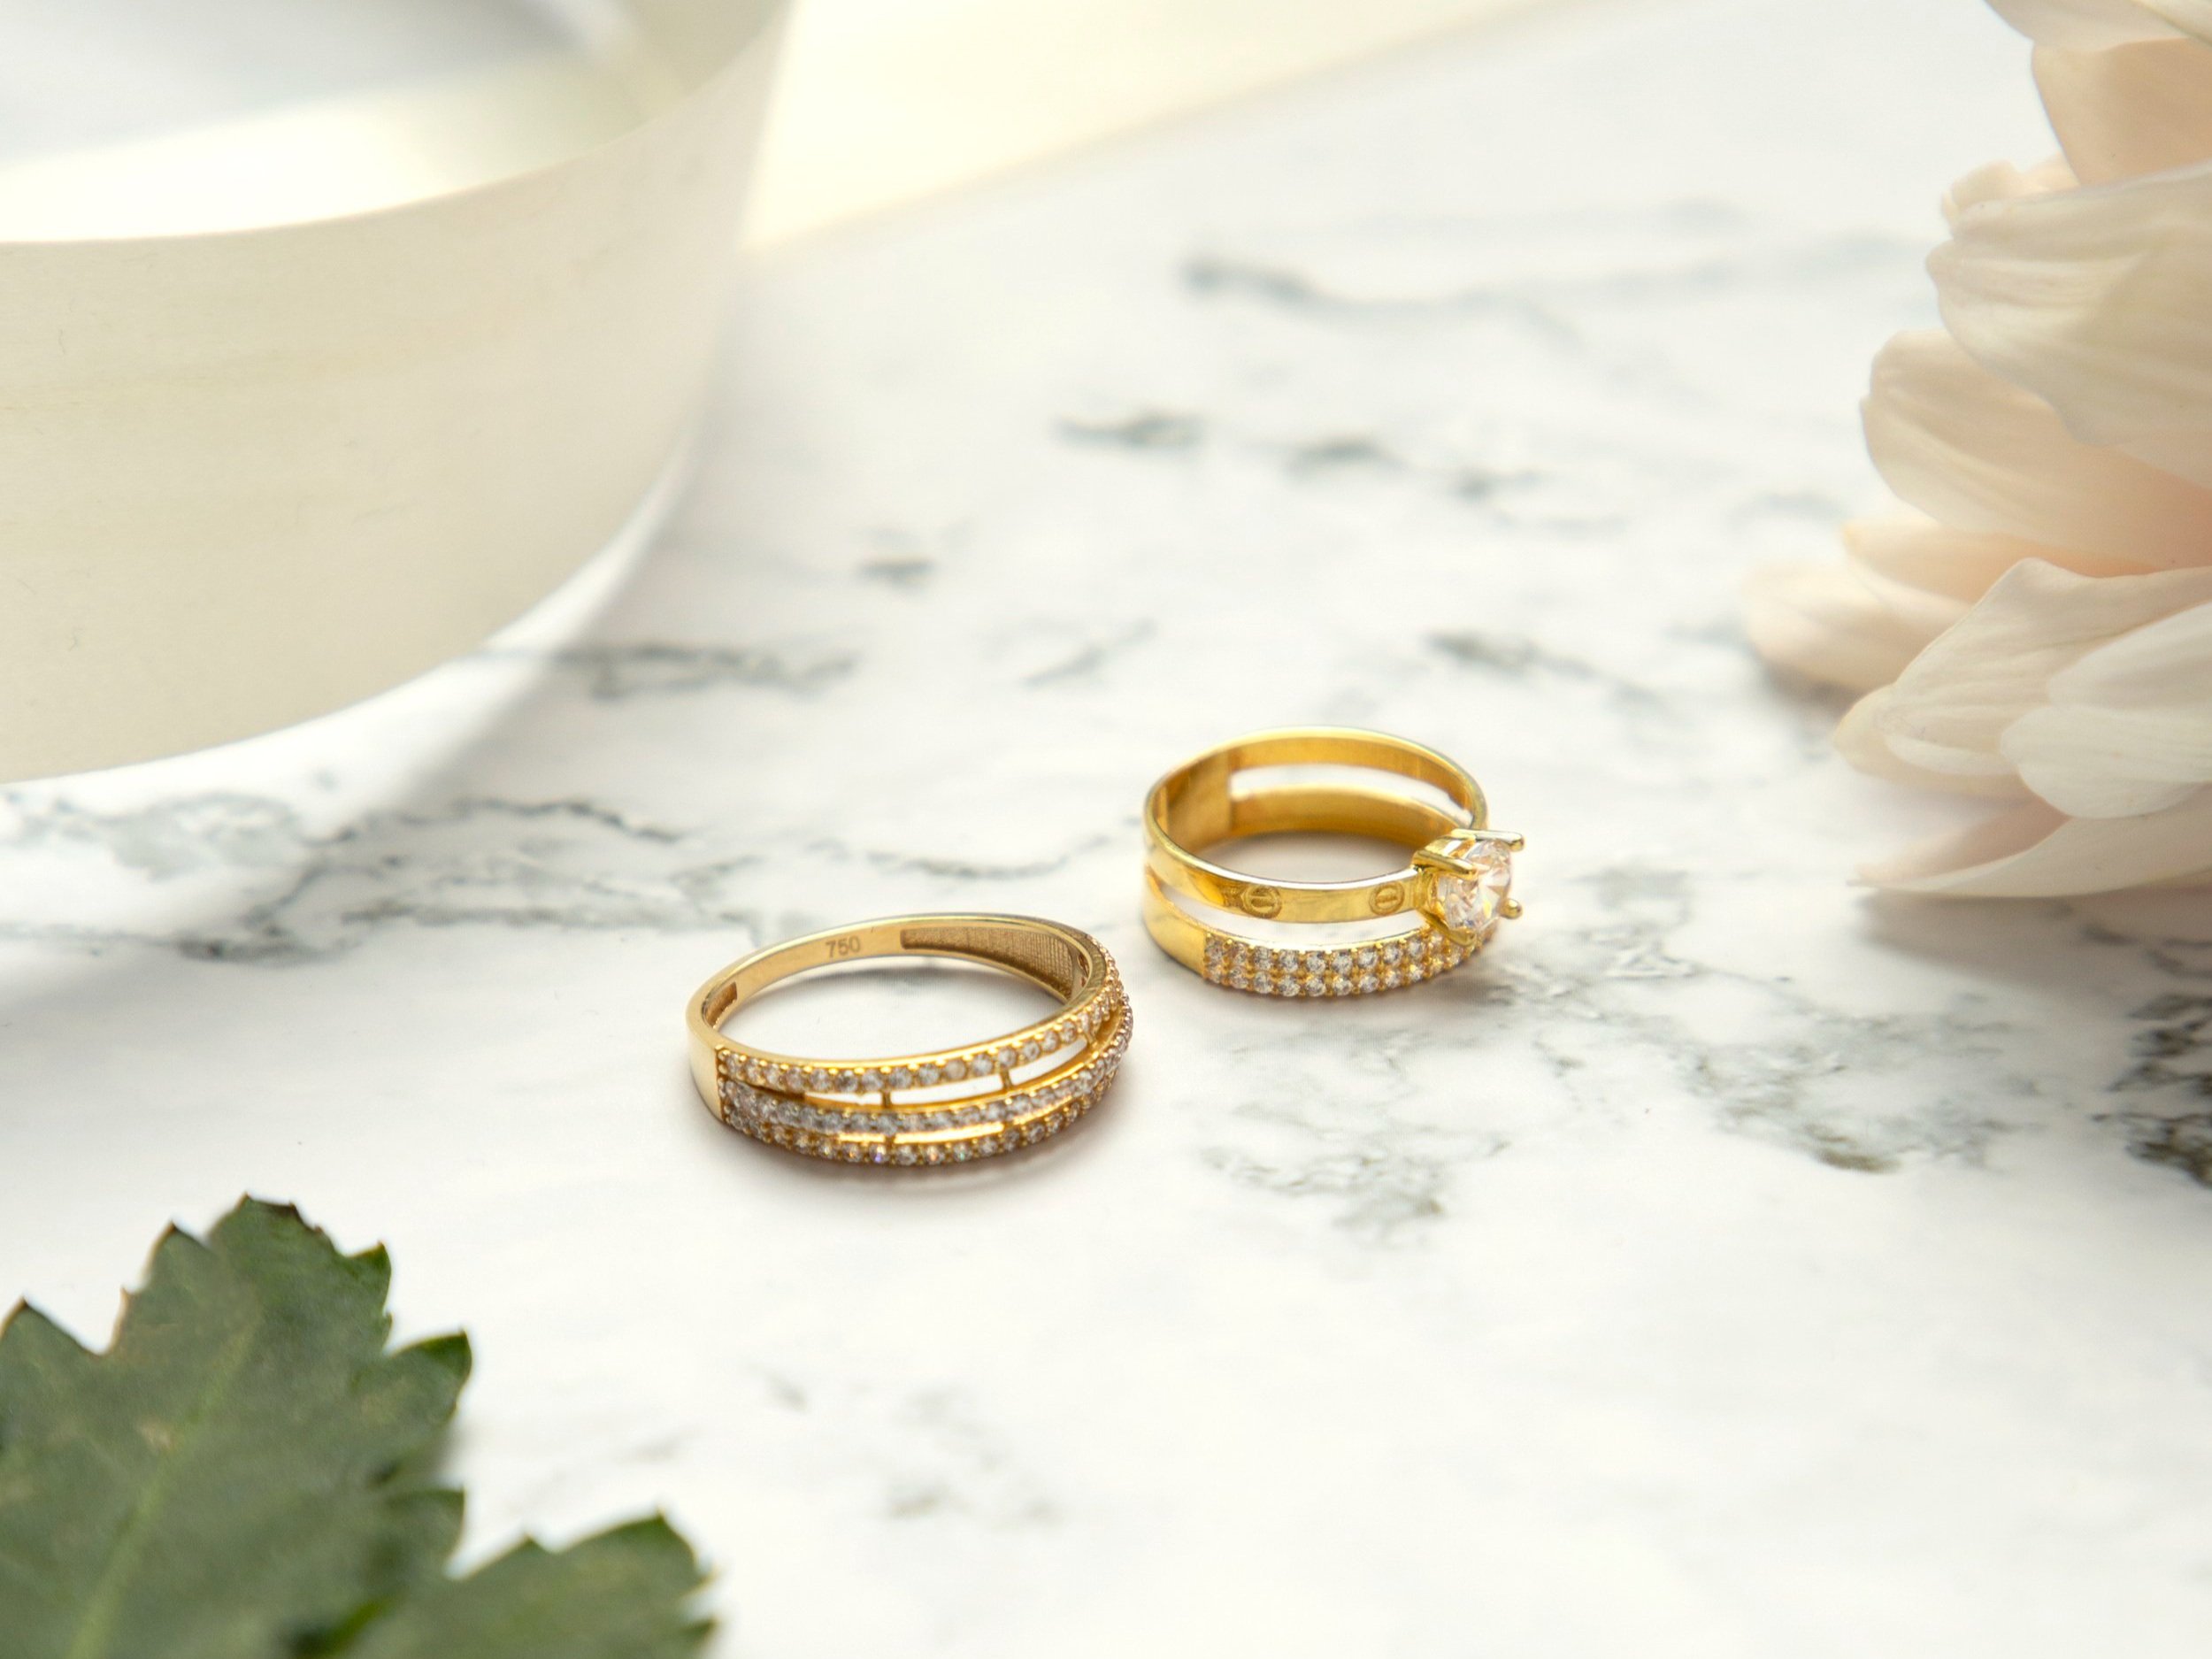 Wedding Ring Photography Tips | The Ultimate Guide